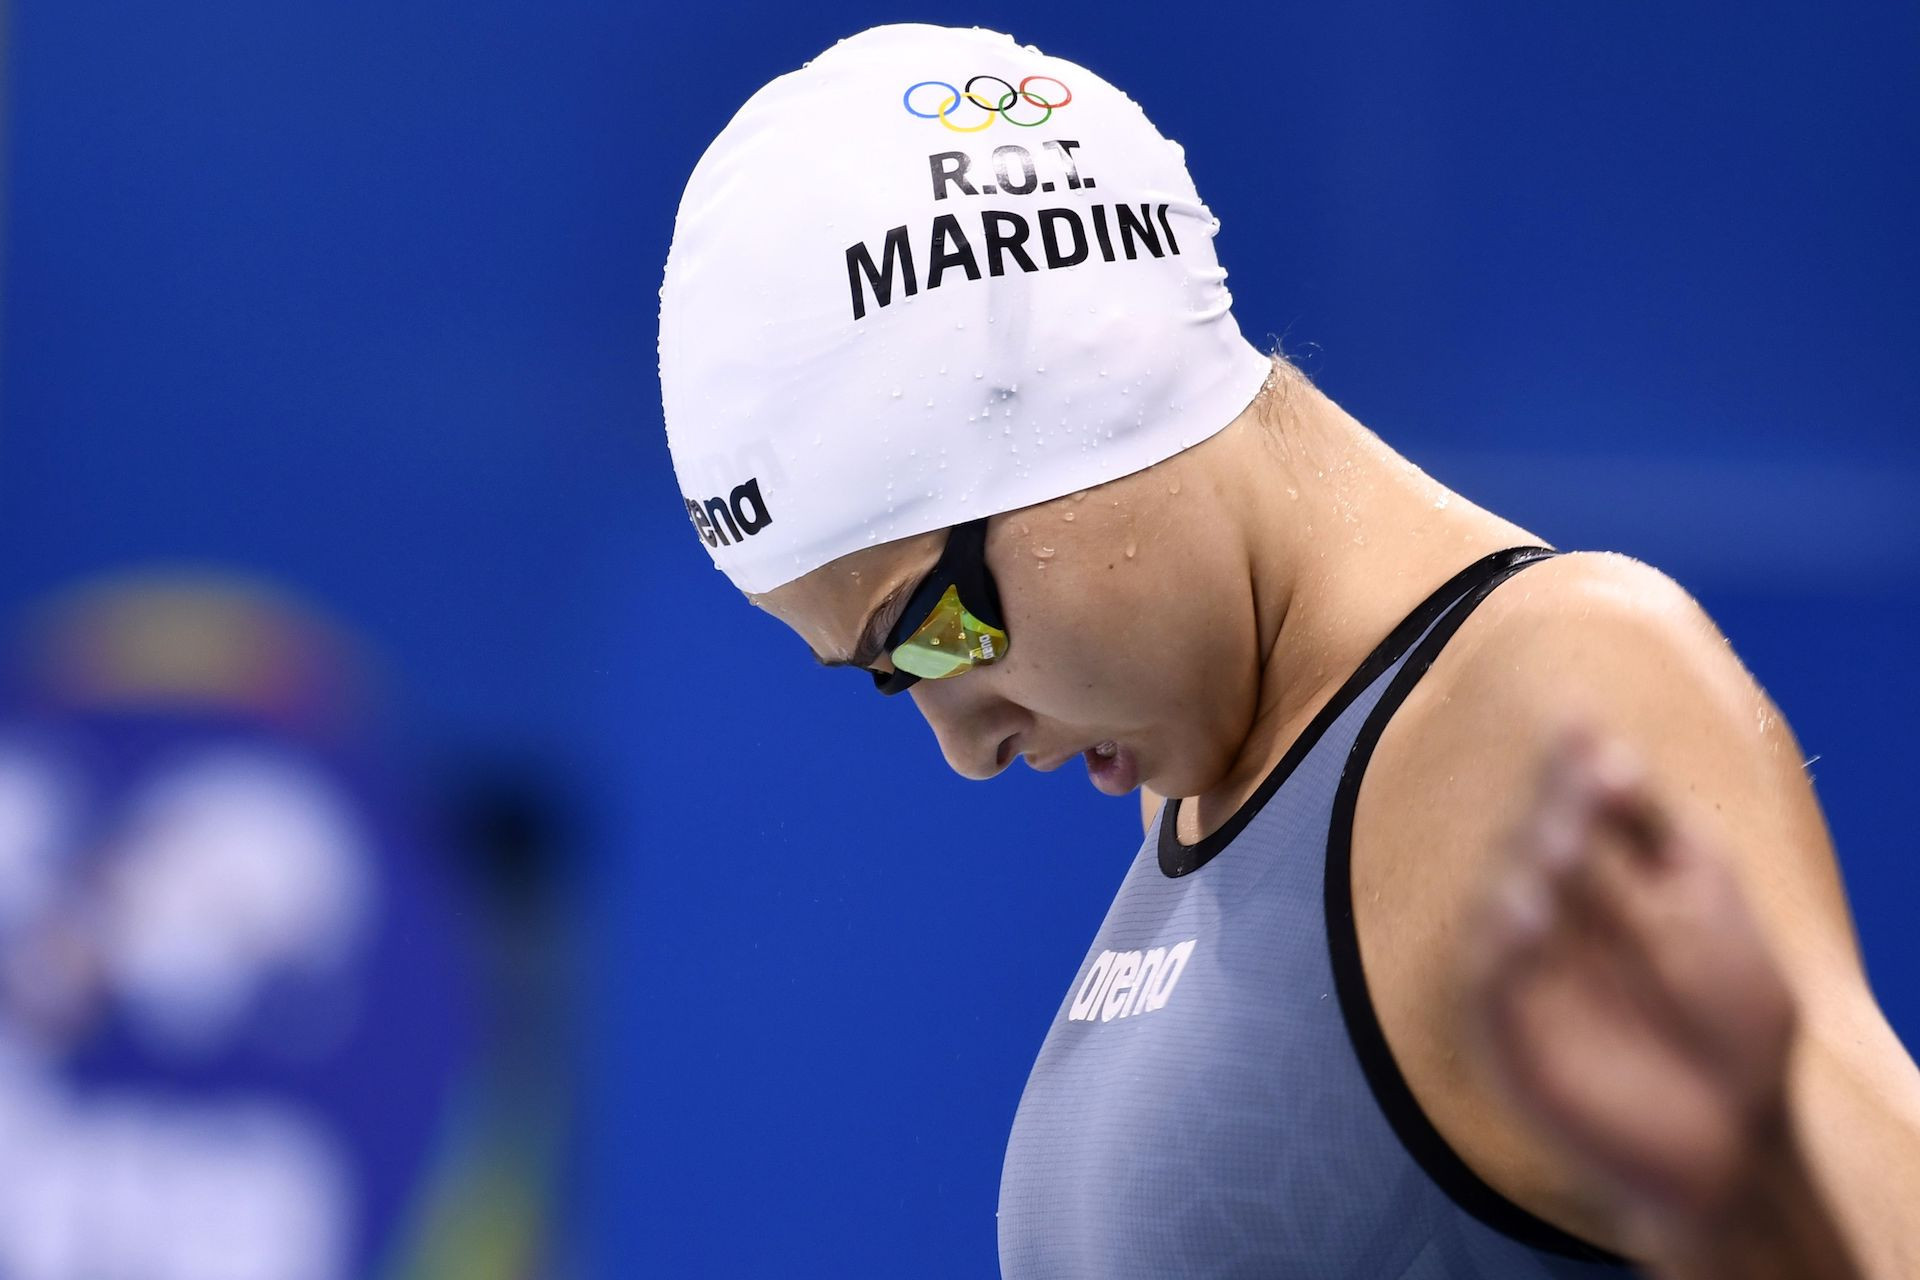 Yusra Mardini prepares for the women's 100m freestyle heat at the Rio 2016 Olympic Games. GETTY IMAGES